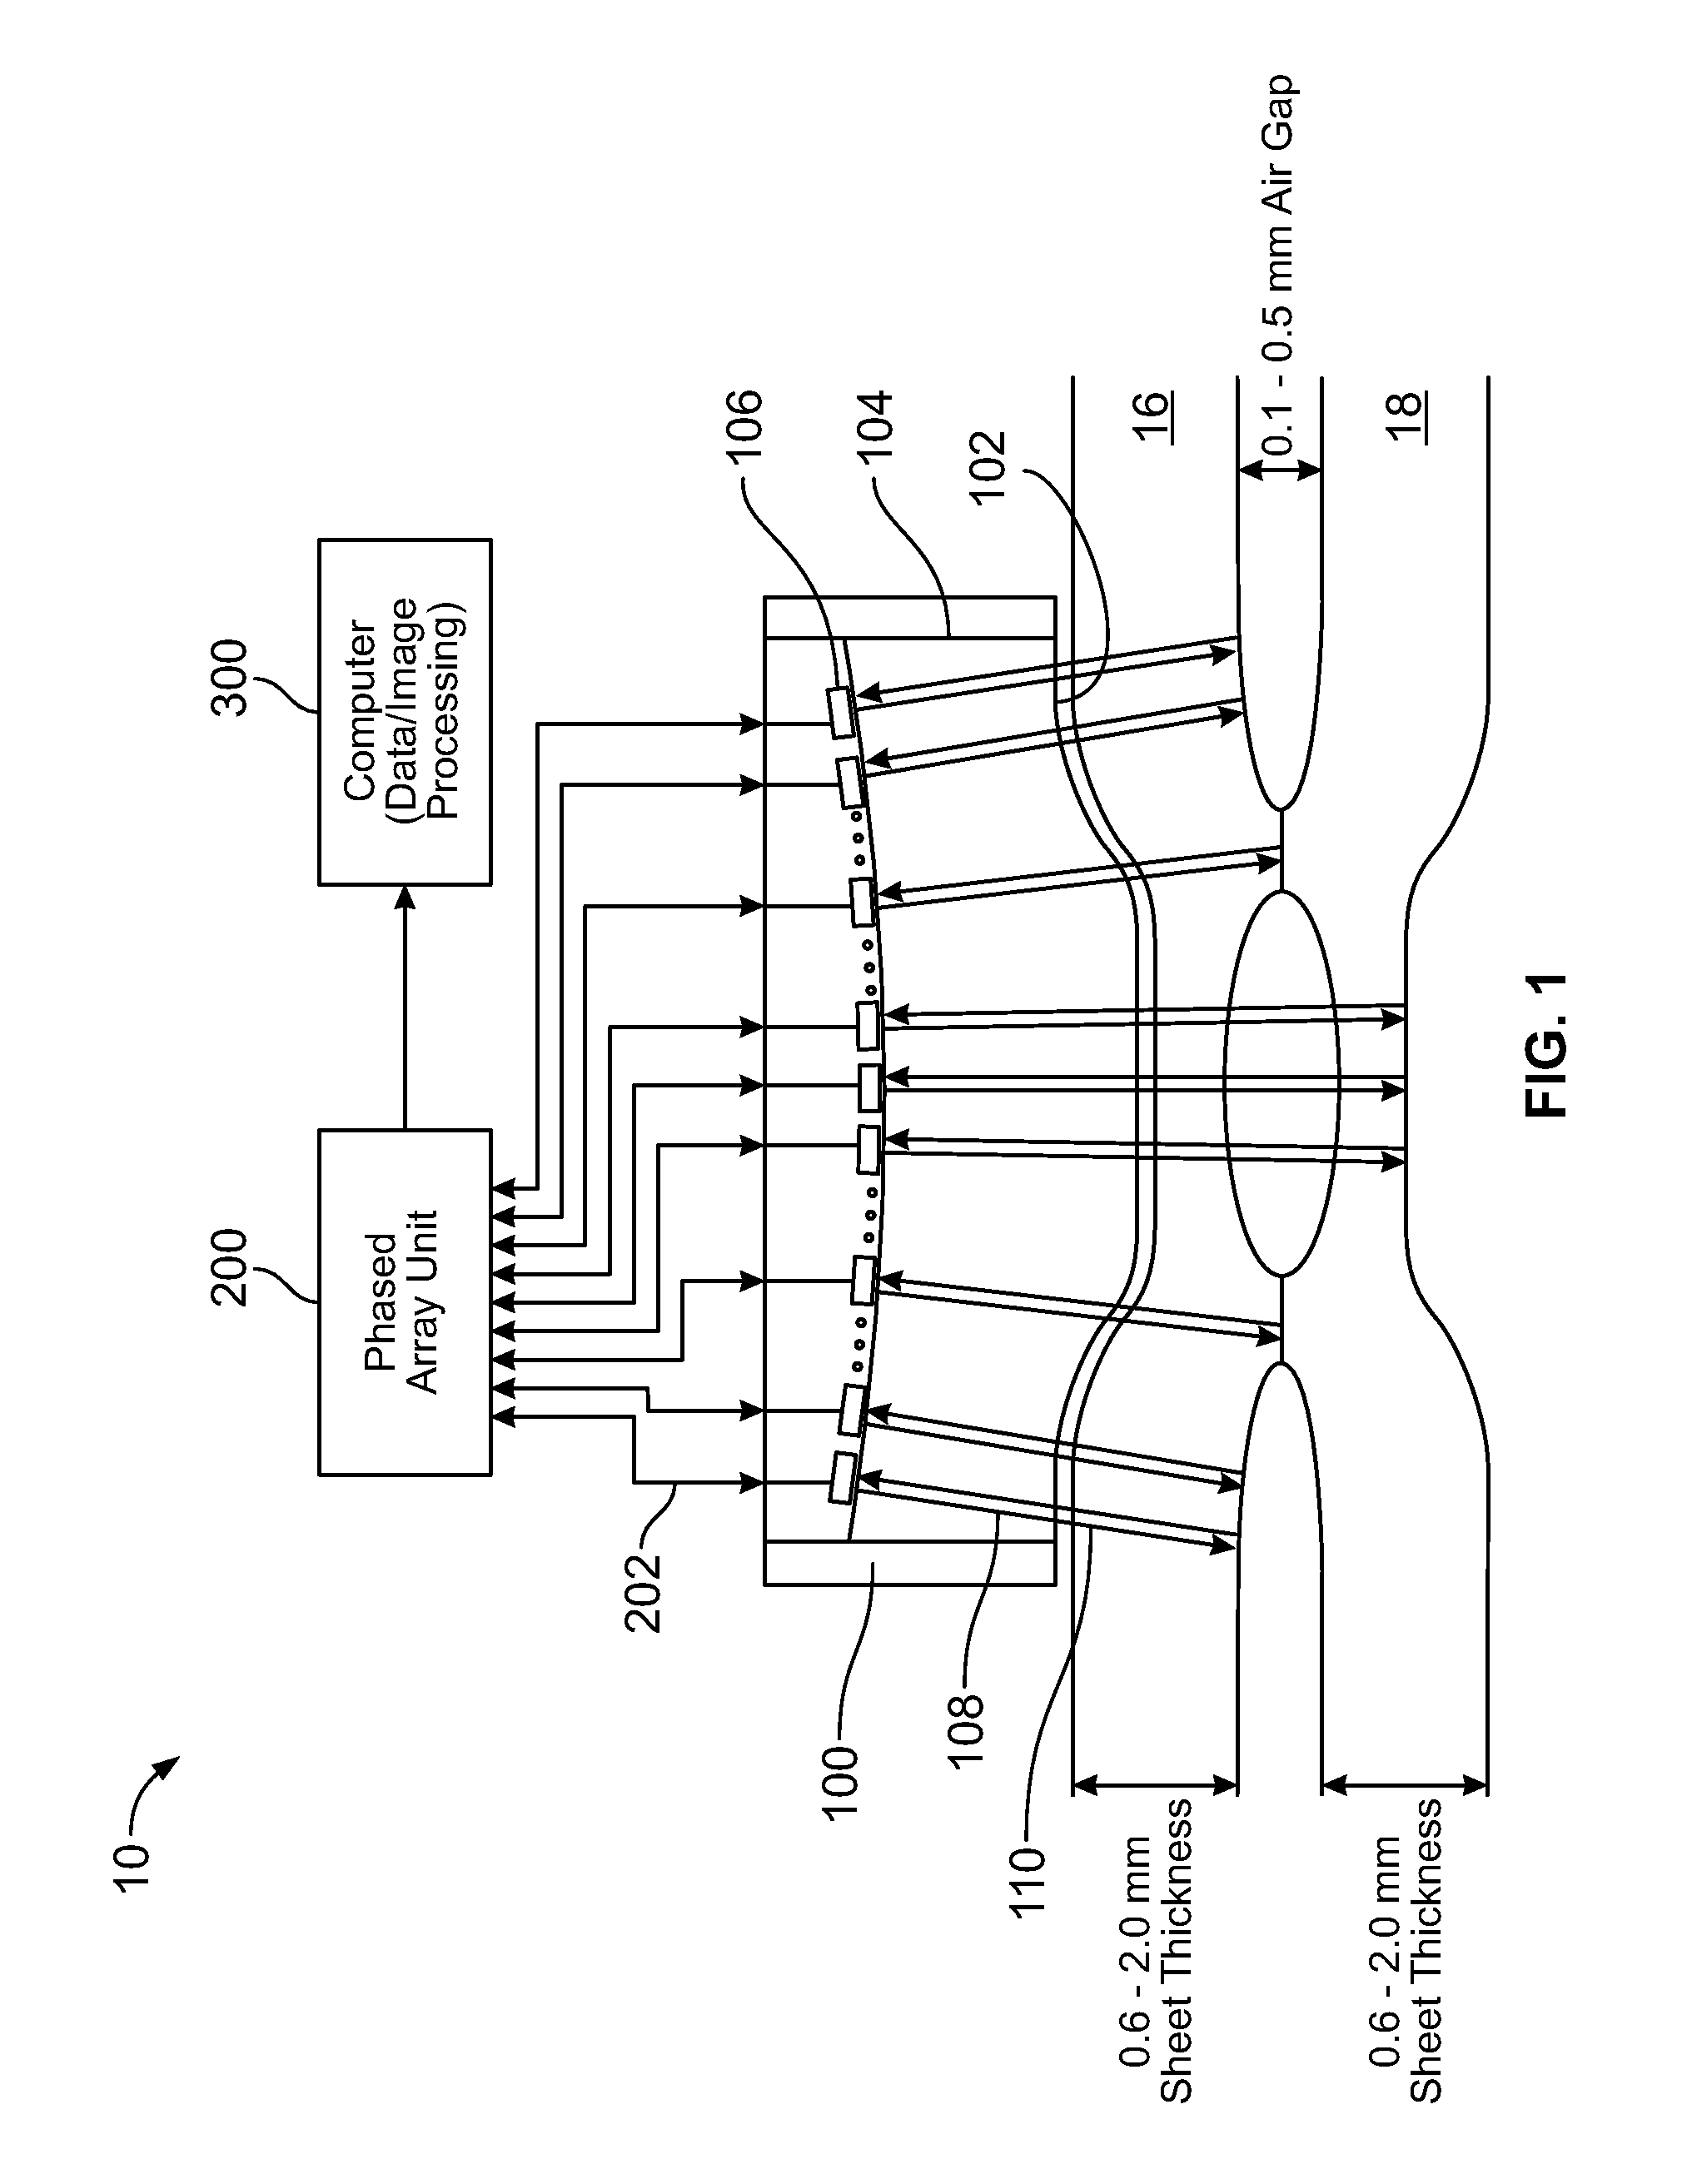 Three-dimensional matrix phased array spot weld inspection system